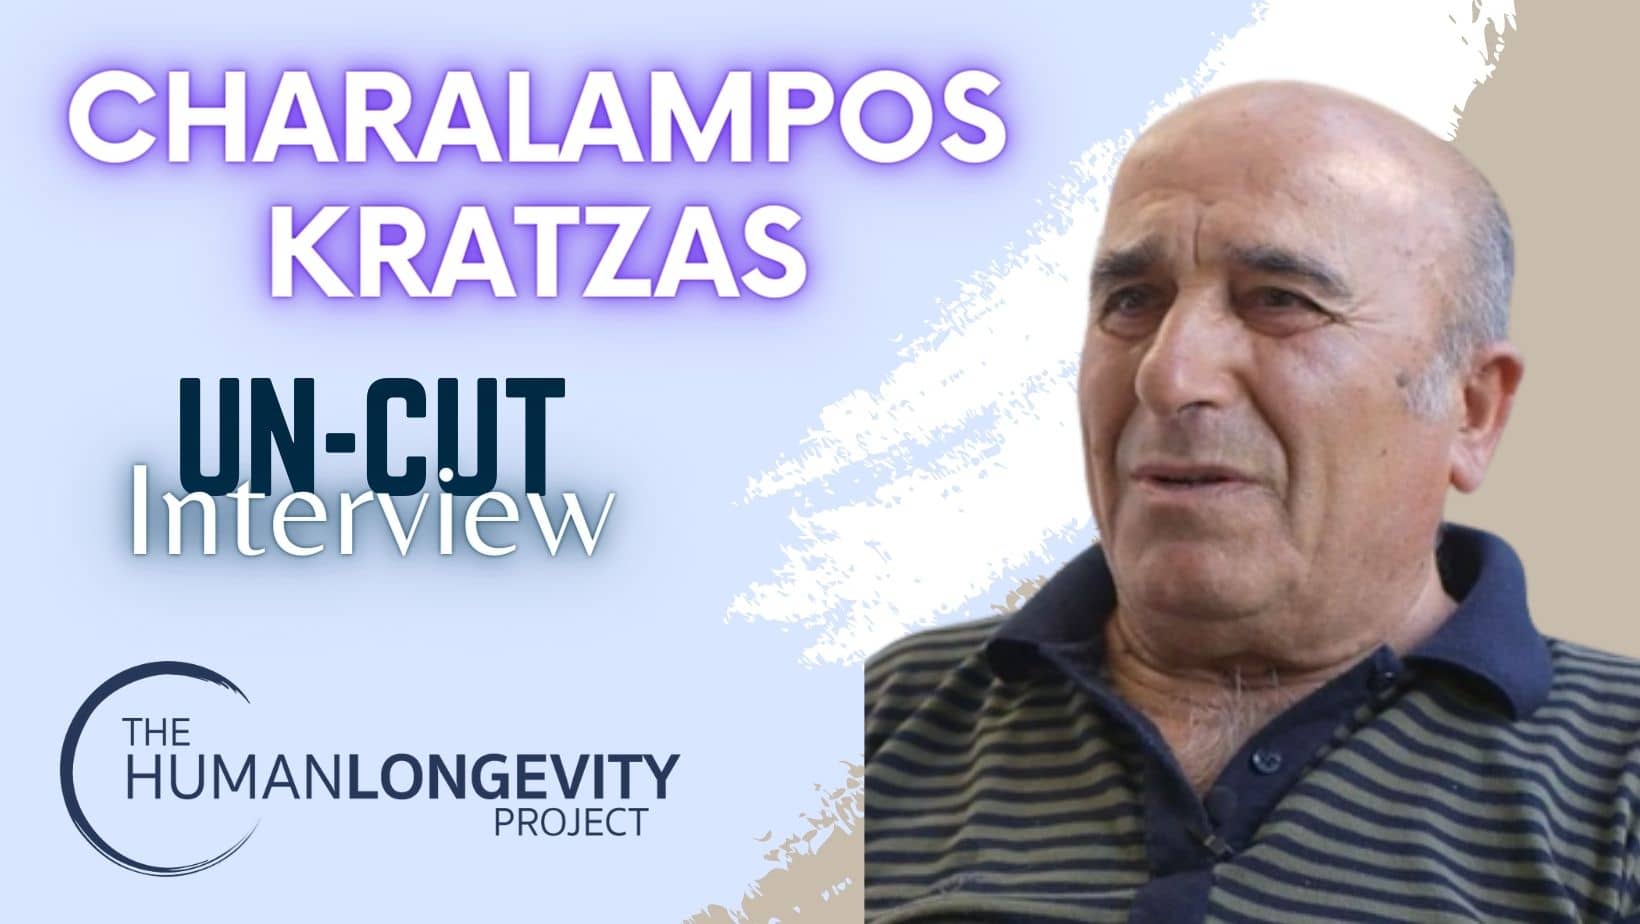 Human Longevity Project Uncut Interview With Charalampos Kratzas